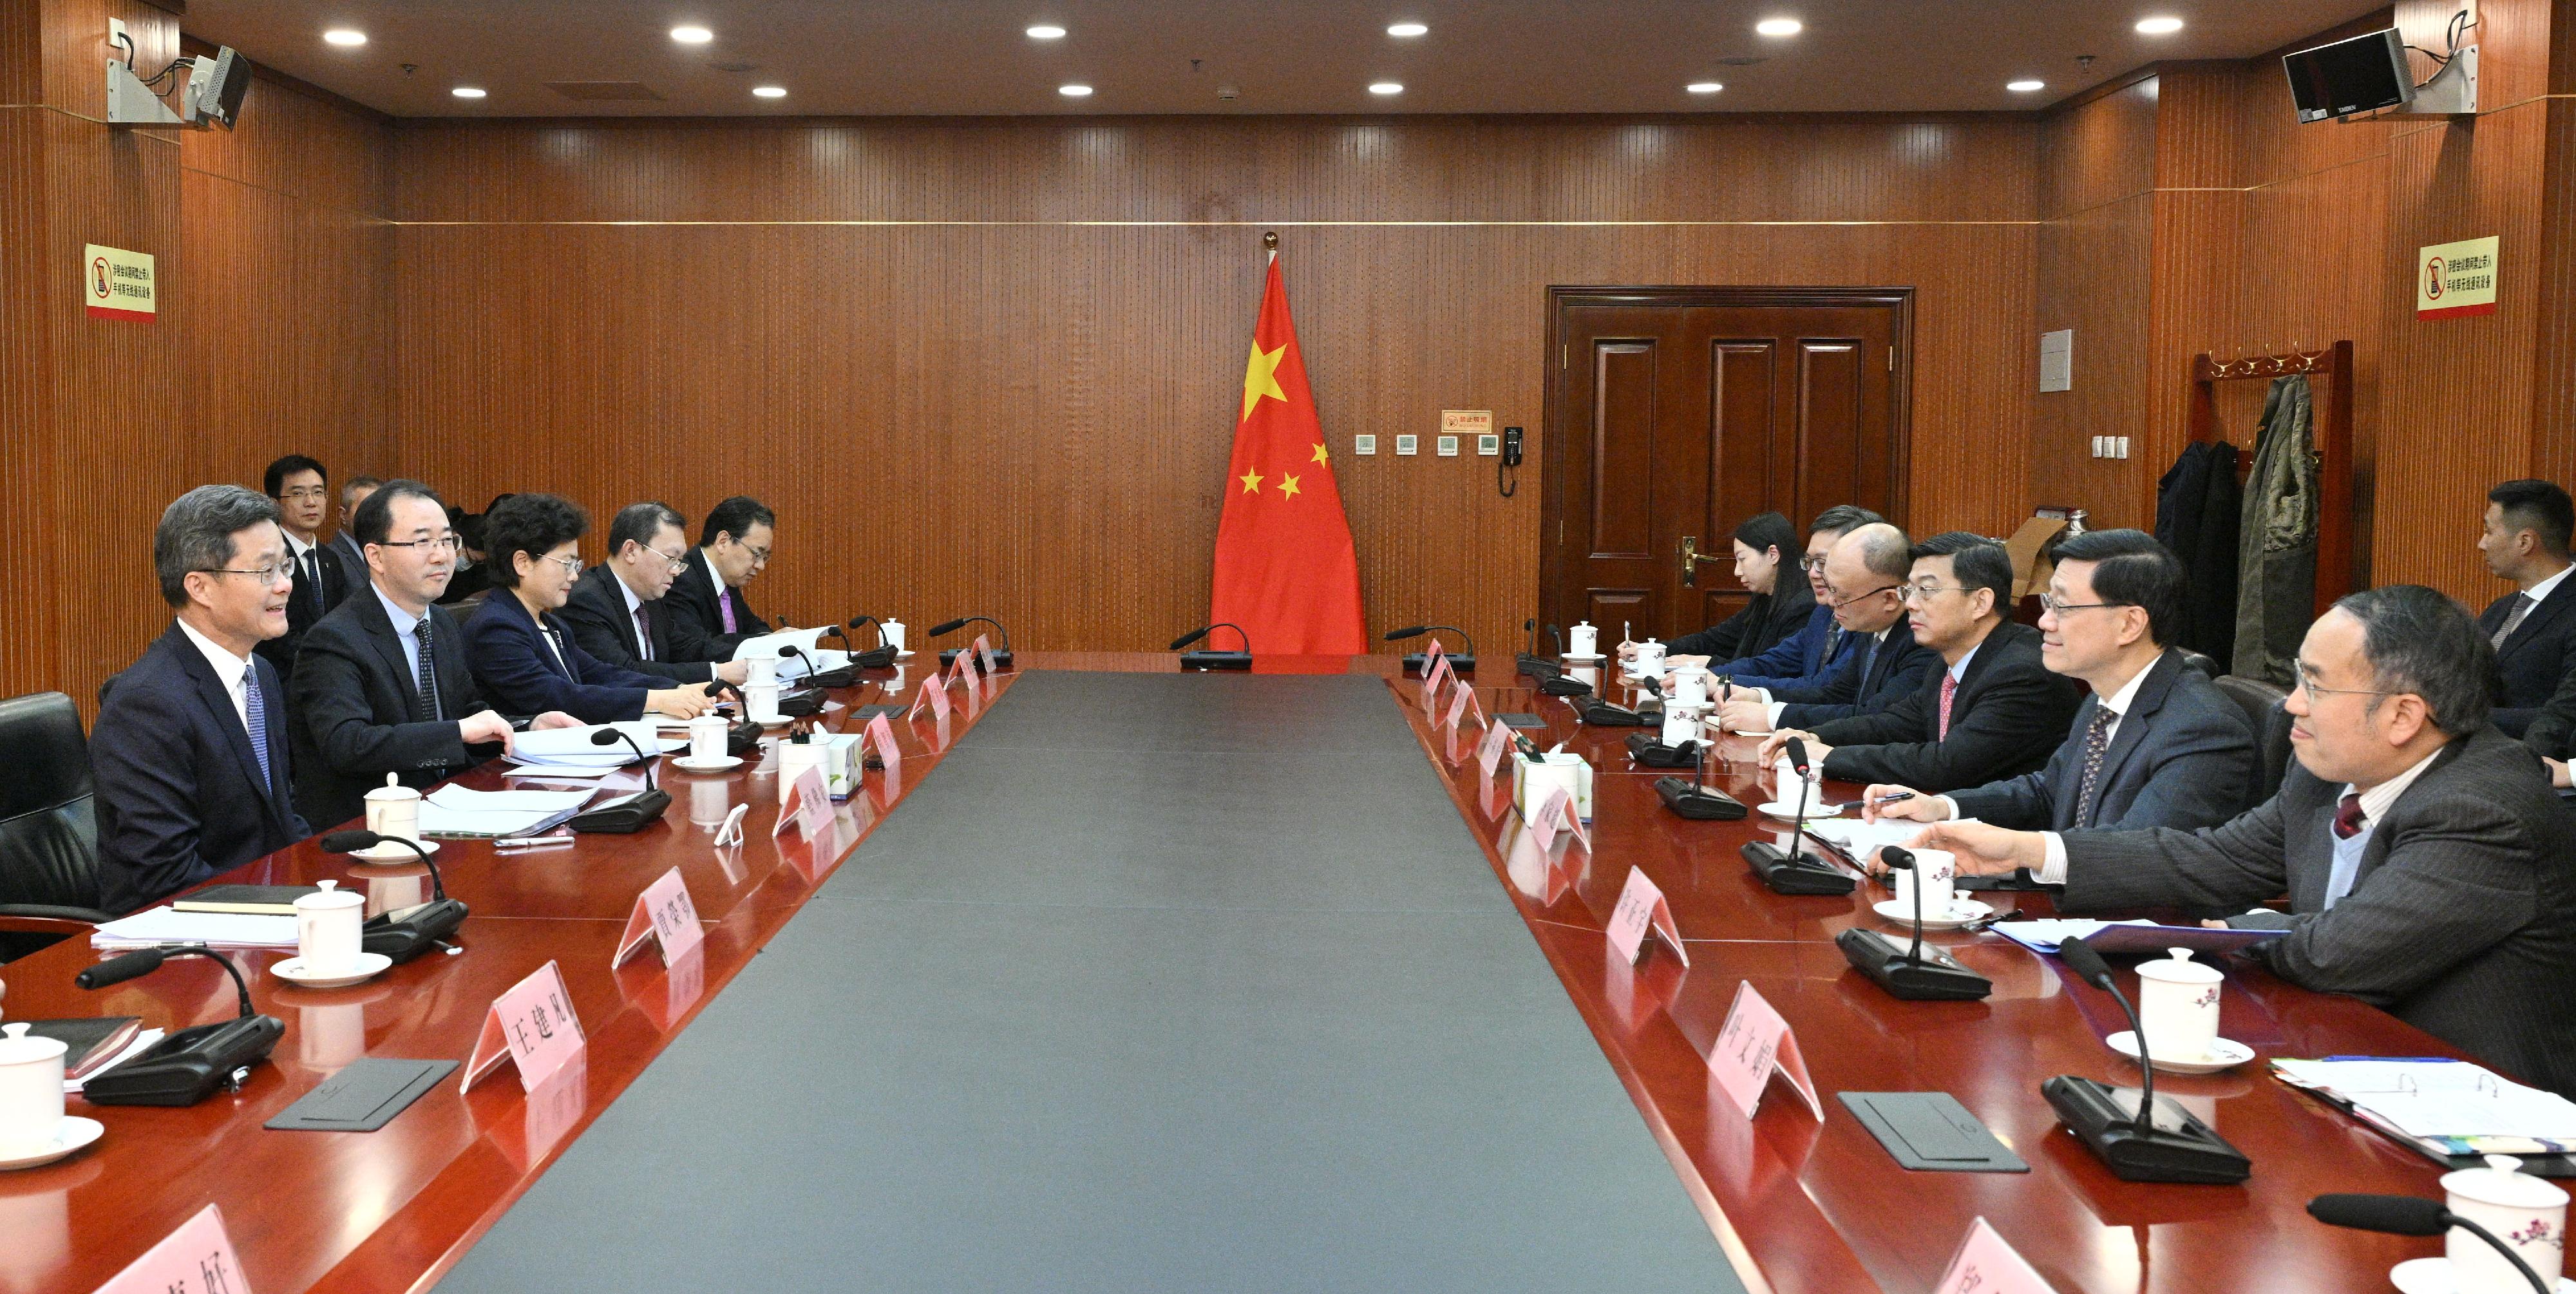 The Chief Executive, Mr John Lee (second right), meets with the Minister of Finance, Mr Lan Fo'an (first left), in Beijing this afternoon (March 4). Also joining the meeting is the Secretary for Financial Services and the Treasury, Mr Christopher Hui (first right).